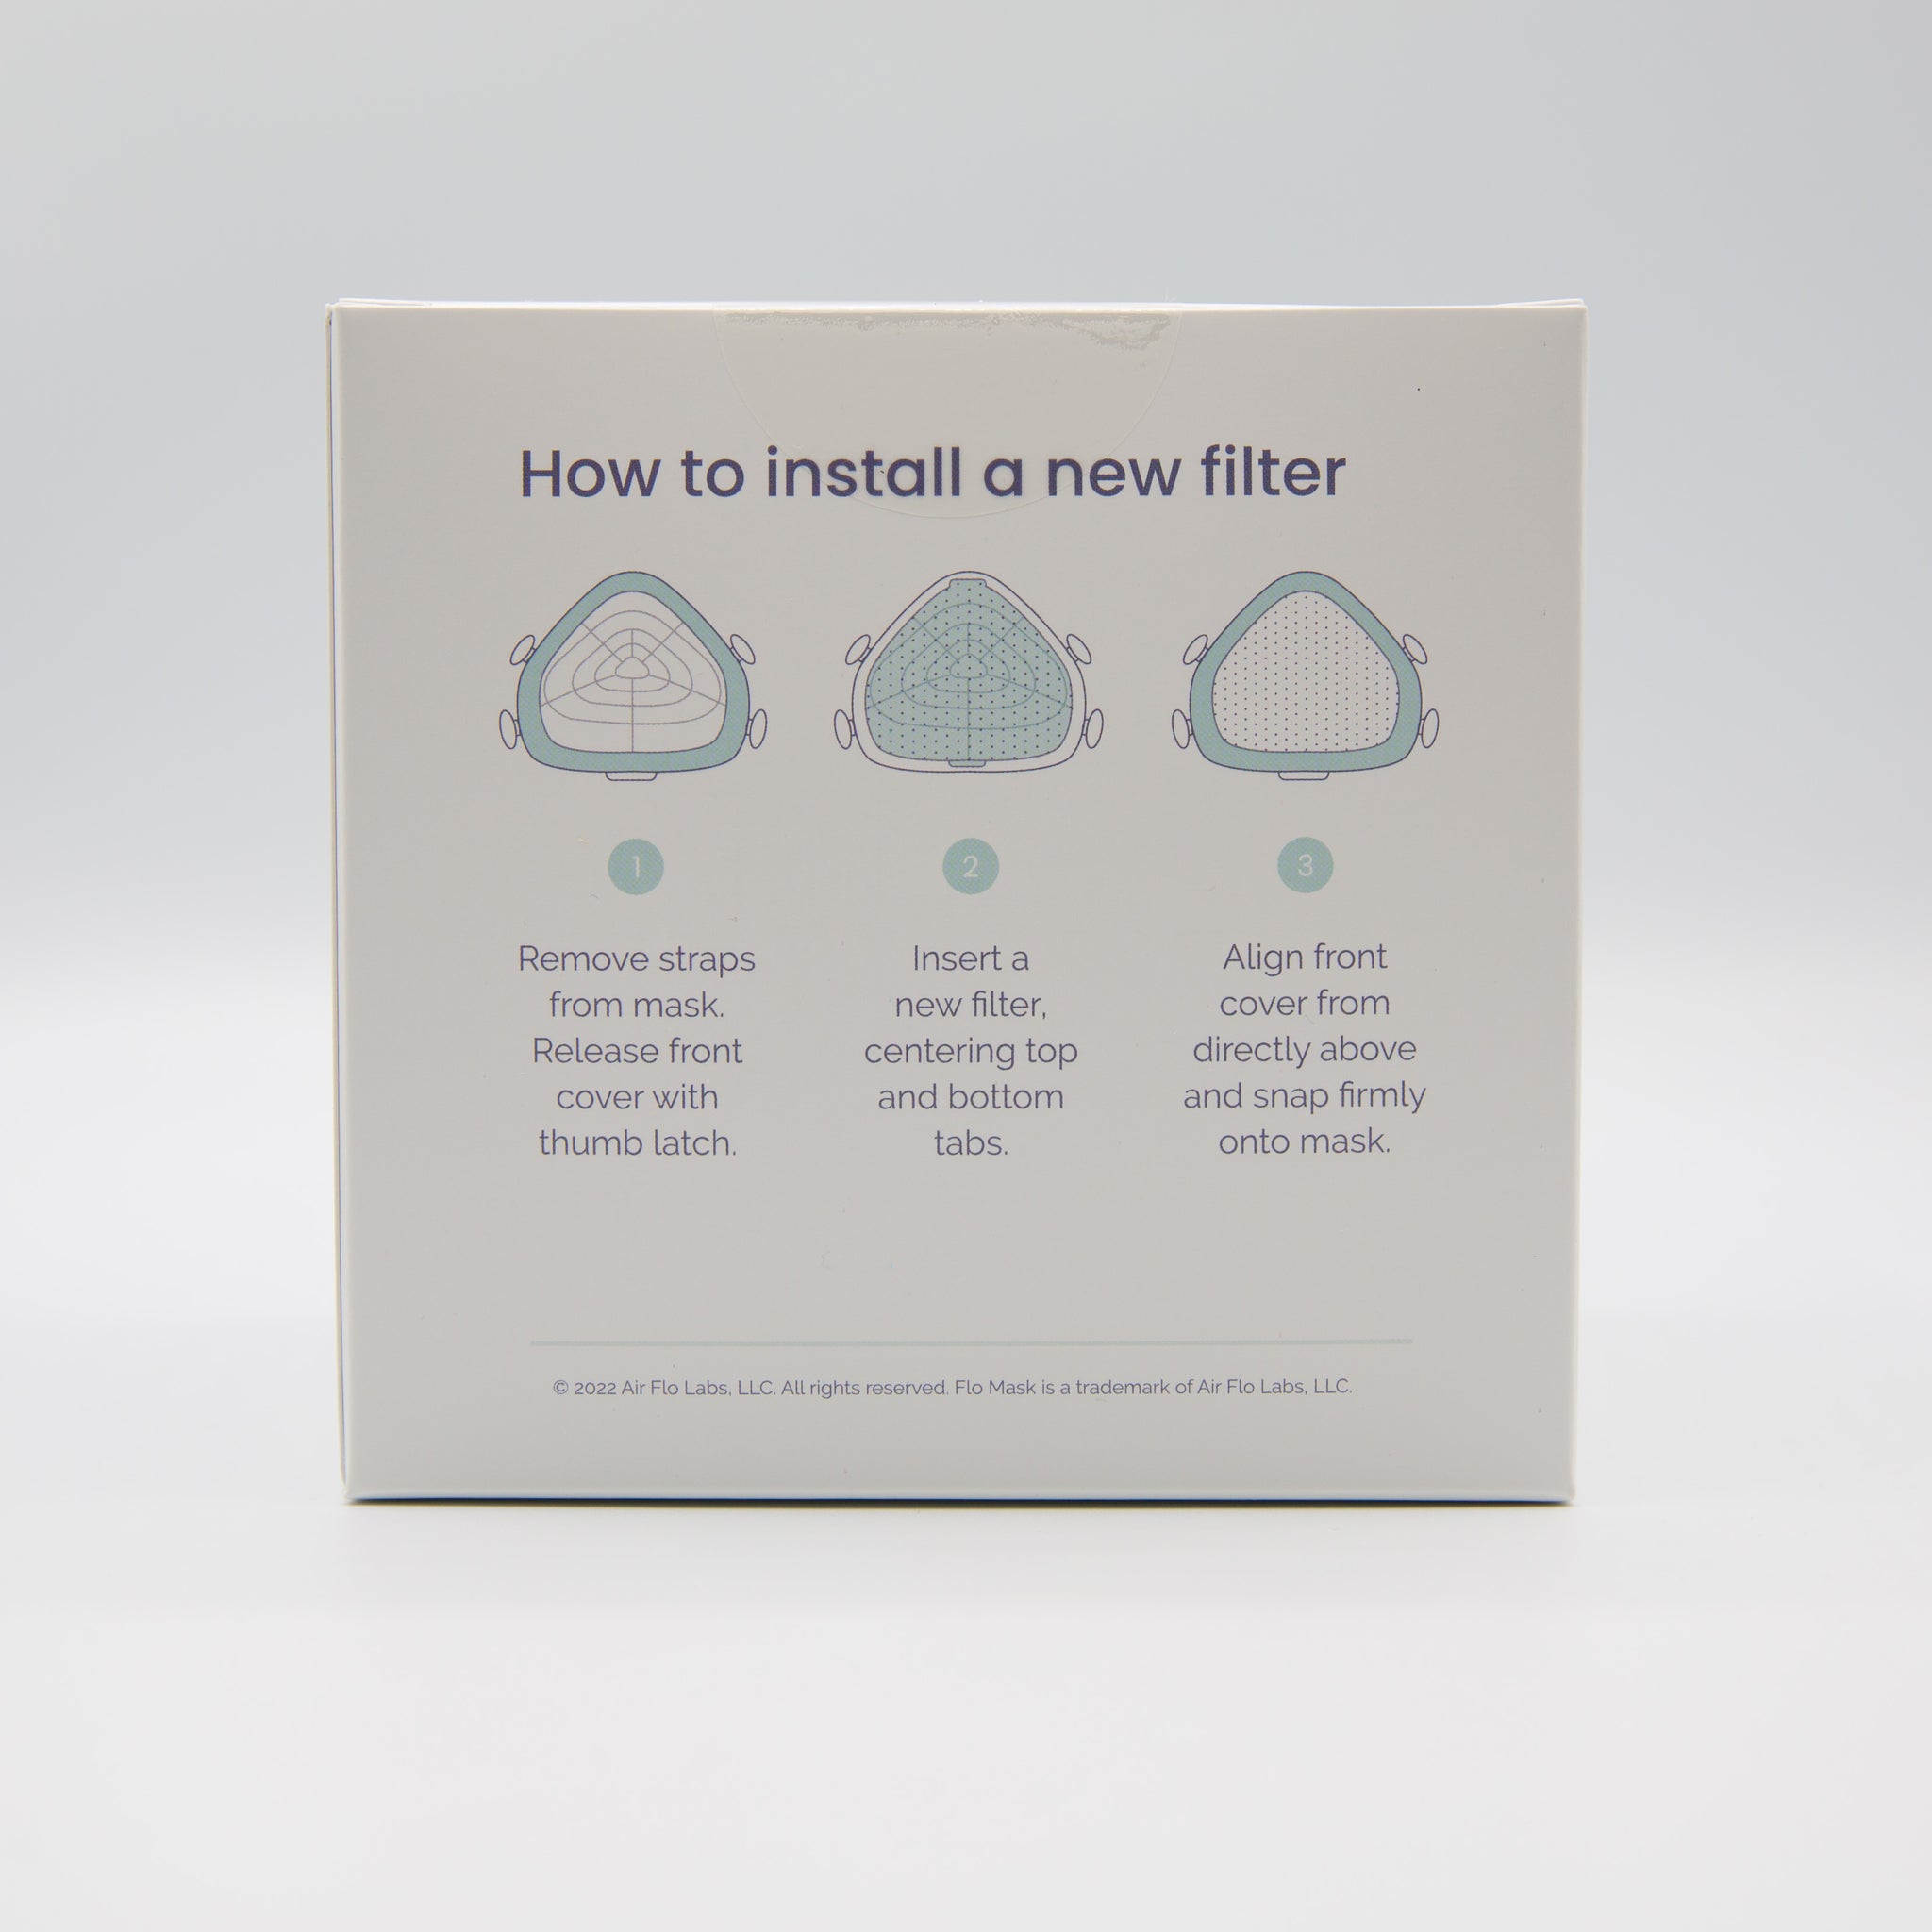 Everyday Filter (50-Pack Replacement Filters)